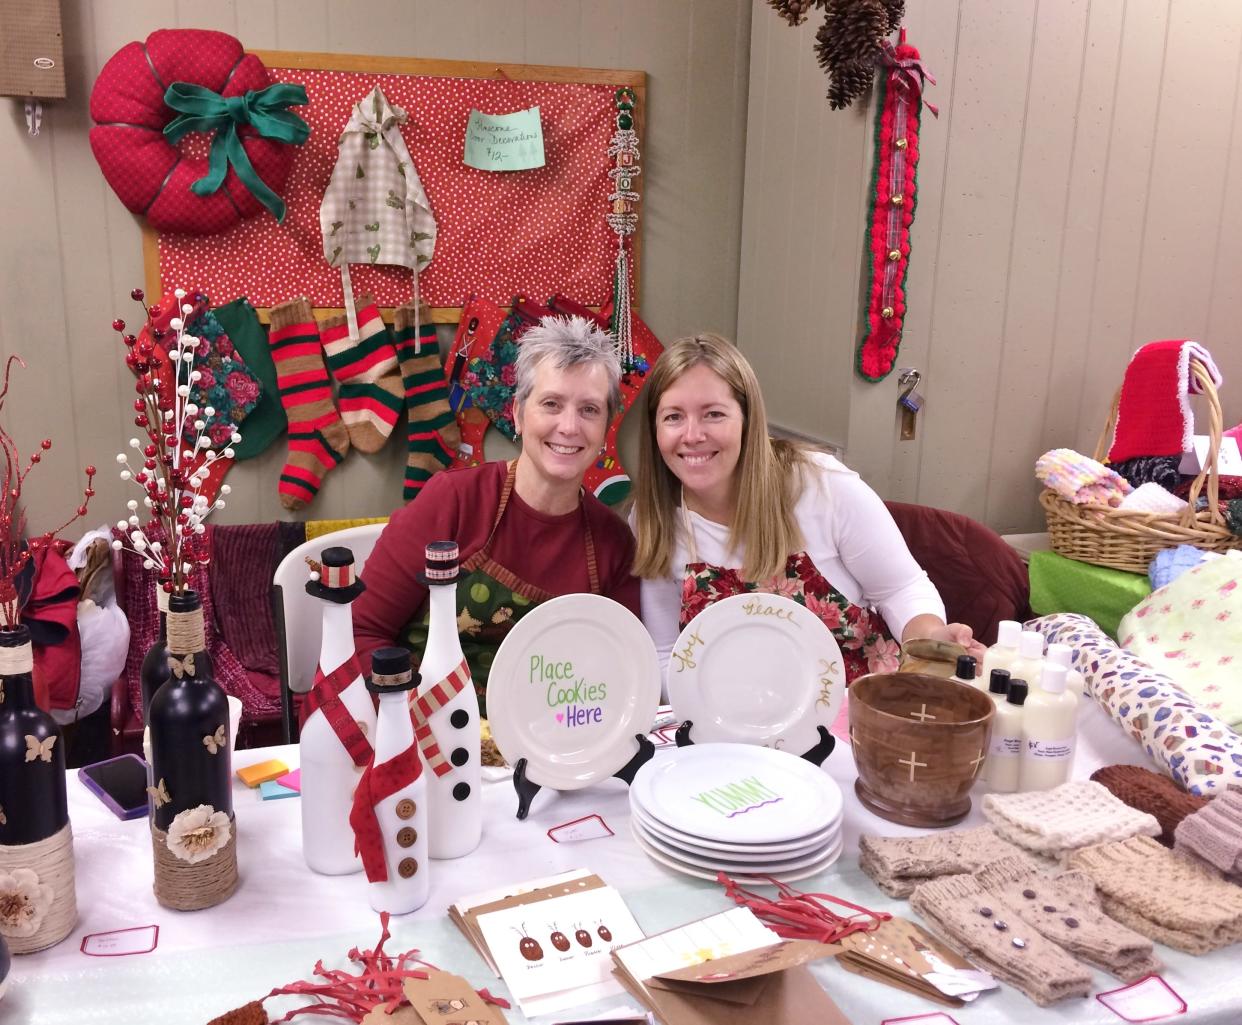 akeville United Church of Christ will hold its annual Christmas Fair on Nov. 18